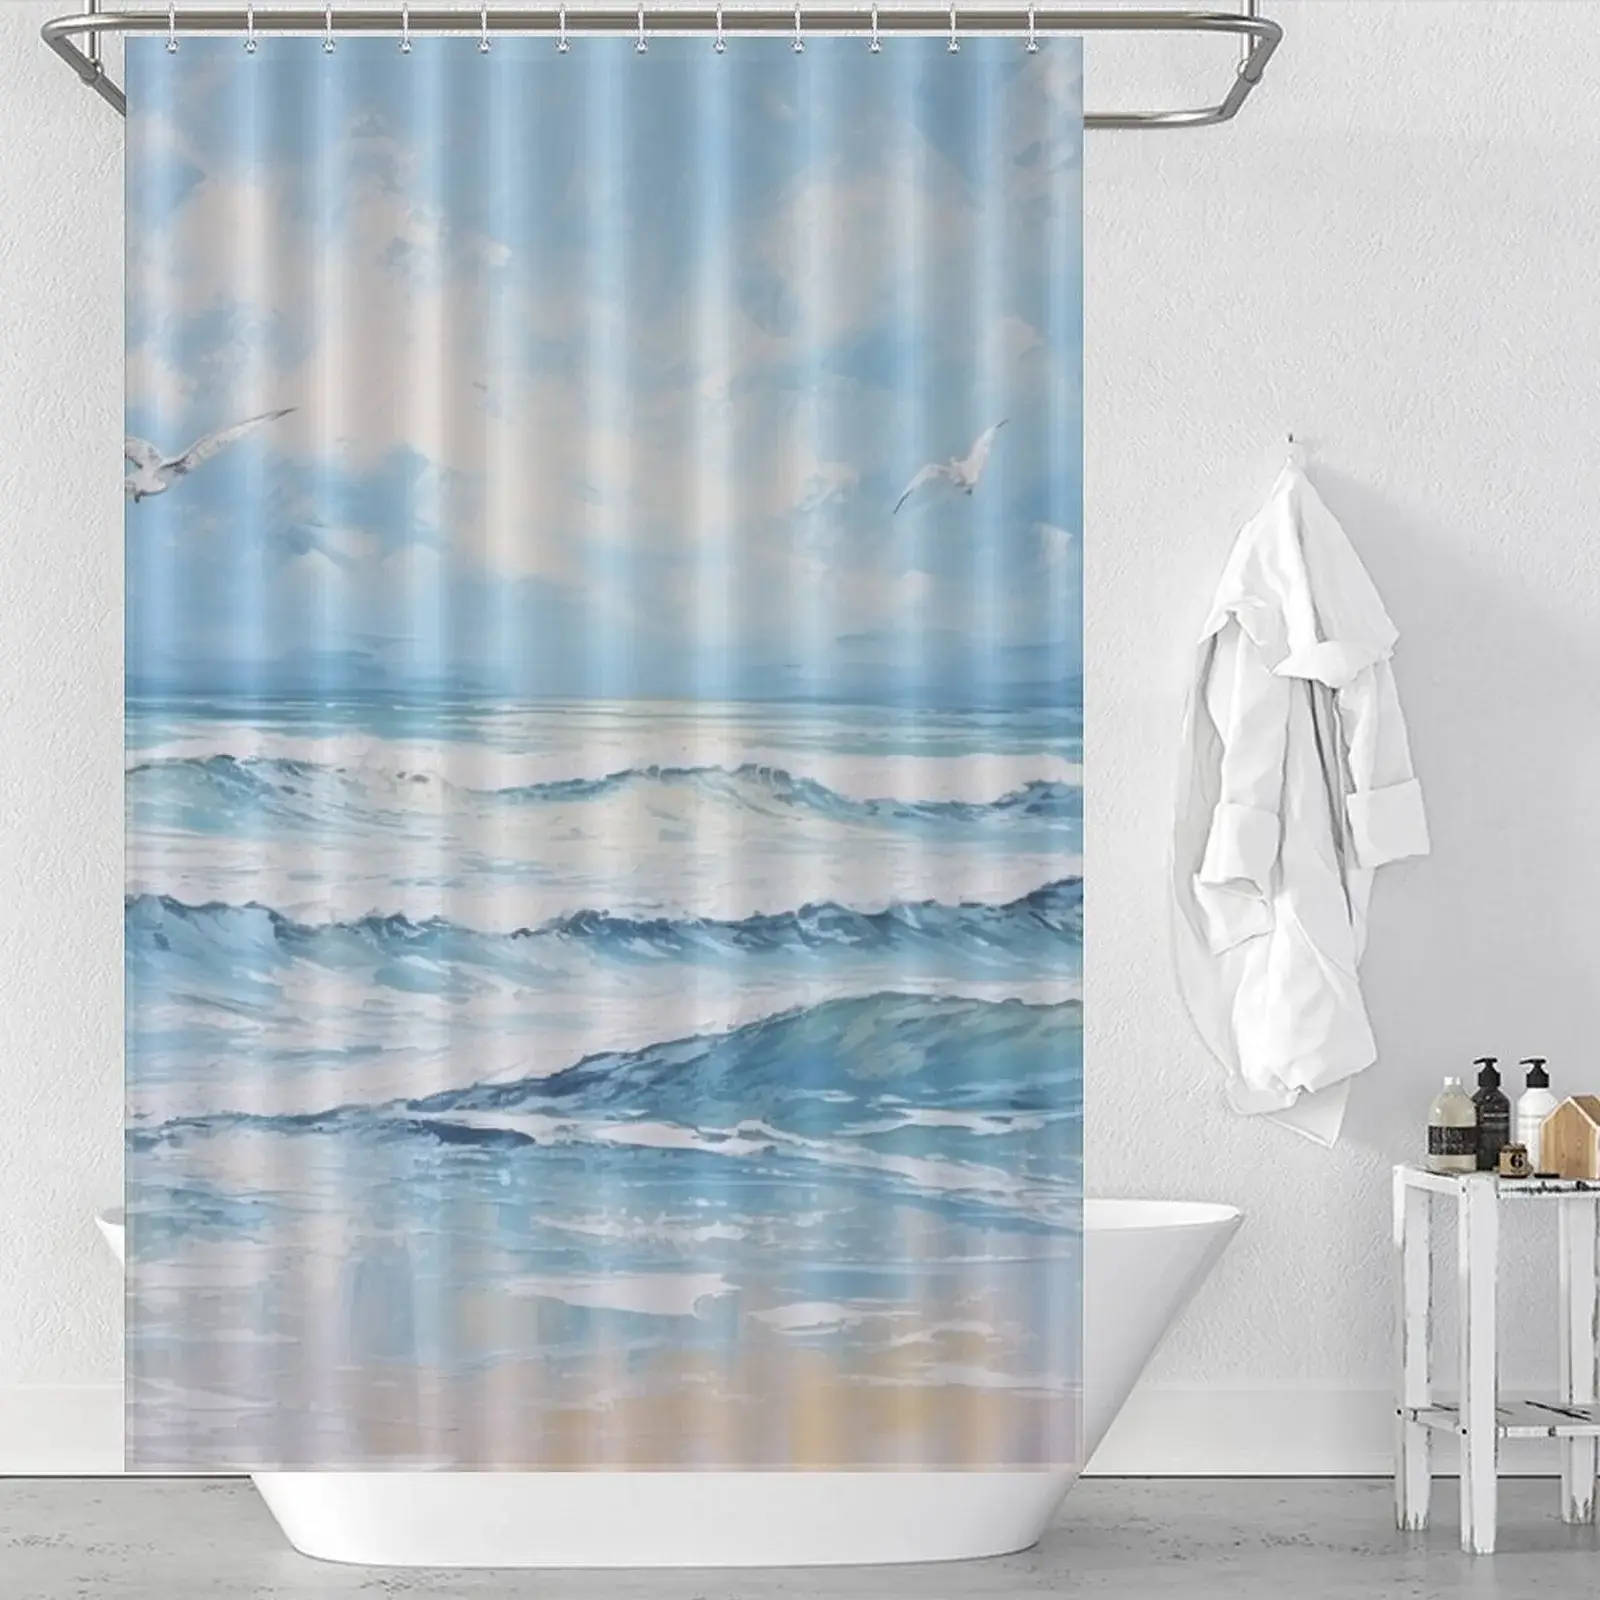 Unique Shower Curtains for Small Bathrooms: A shower curtain with an ocean scene and seagulls.